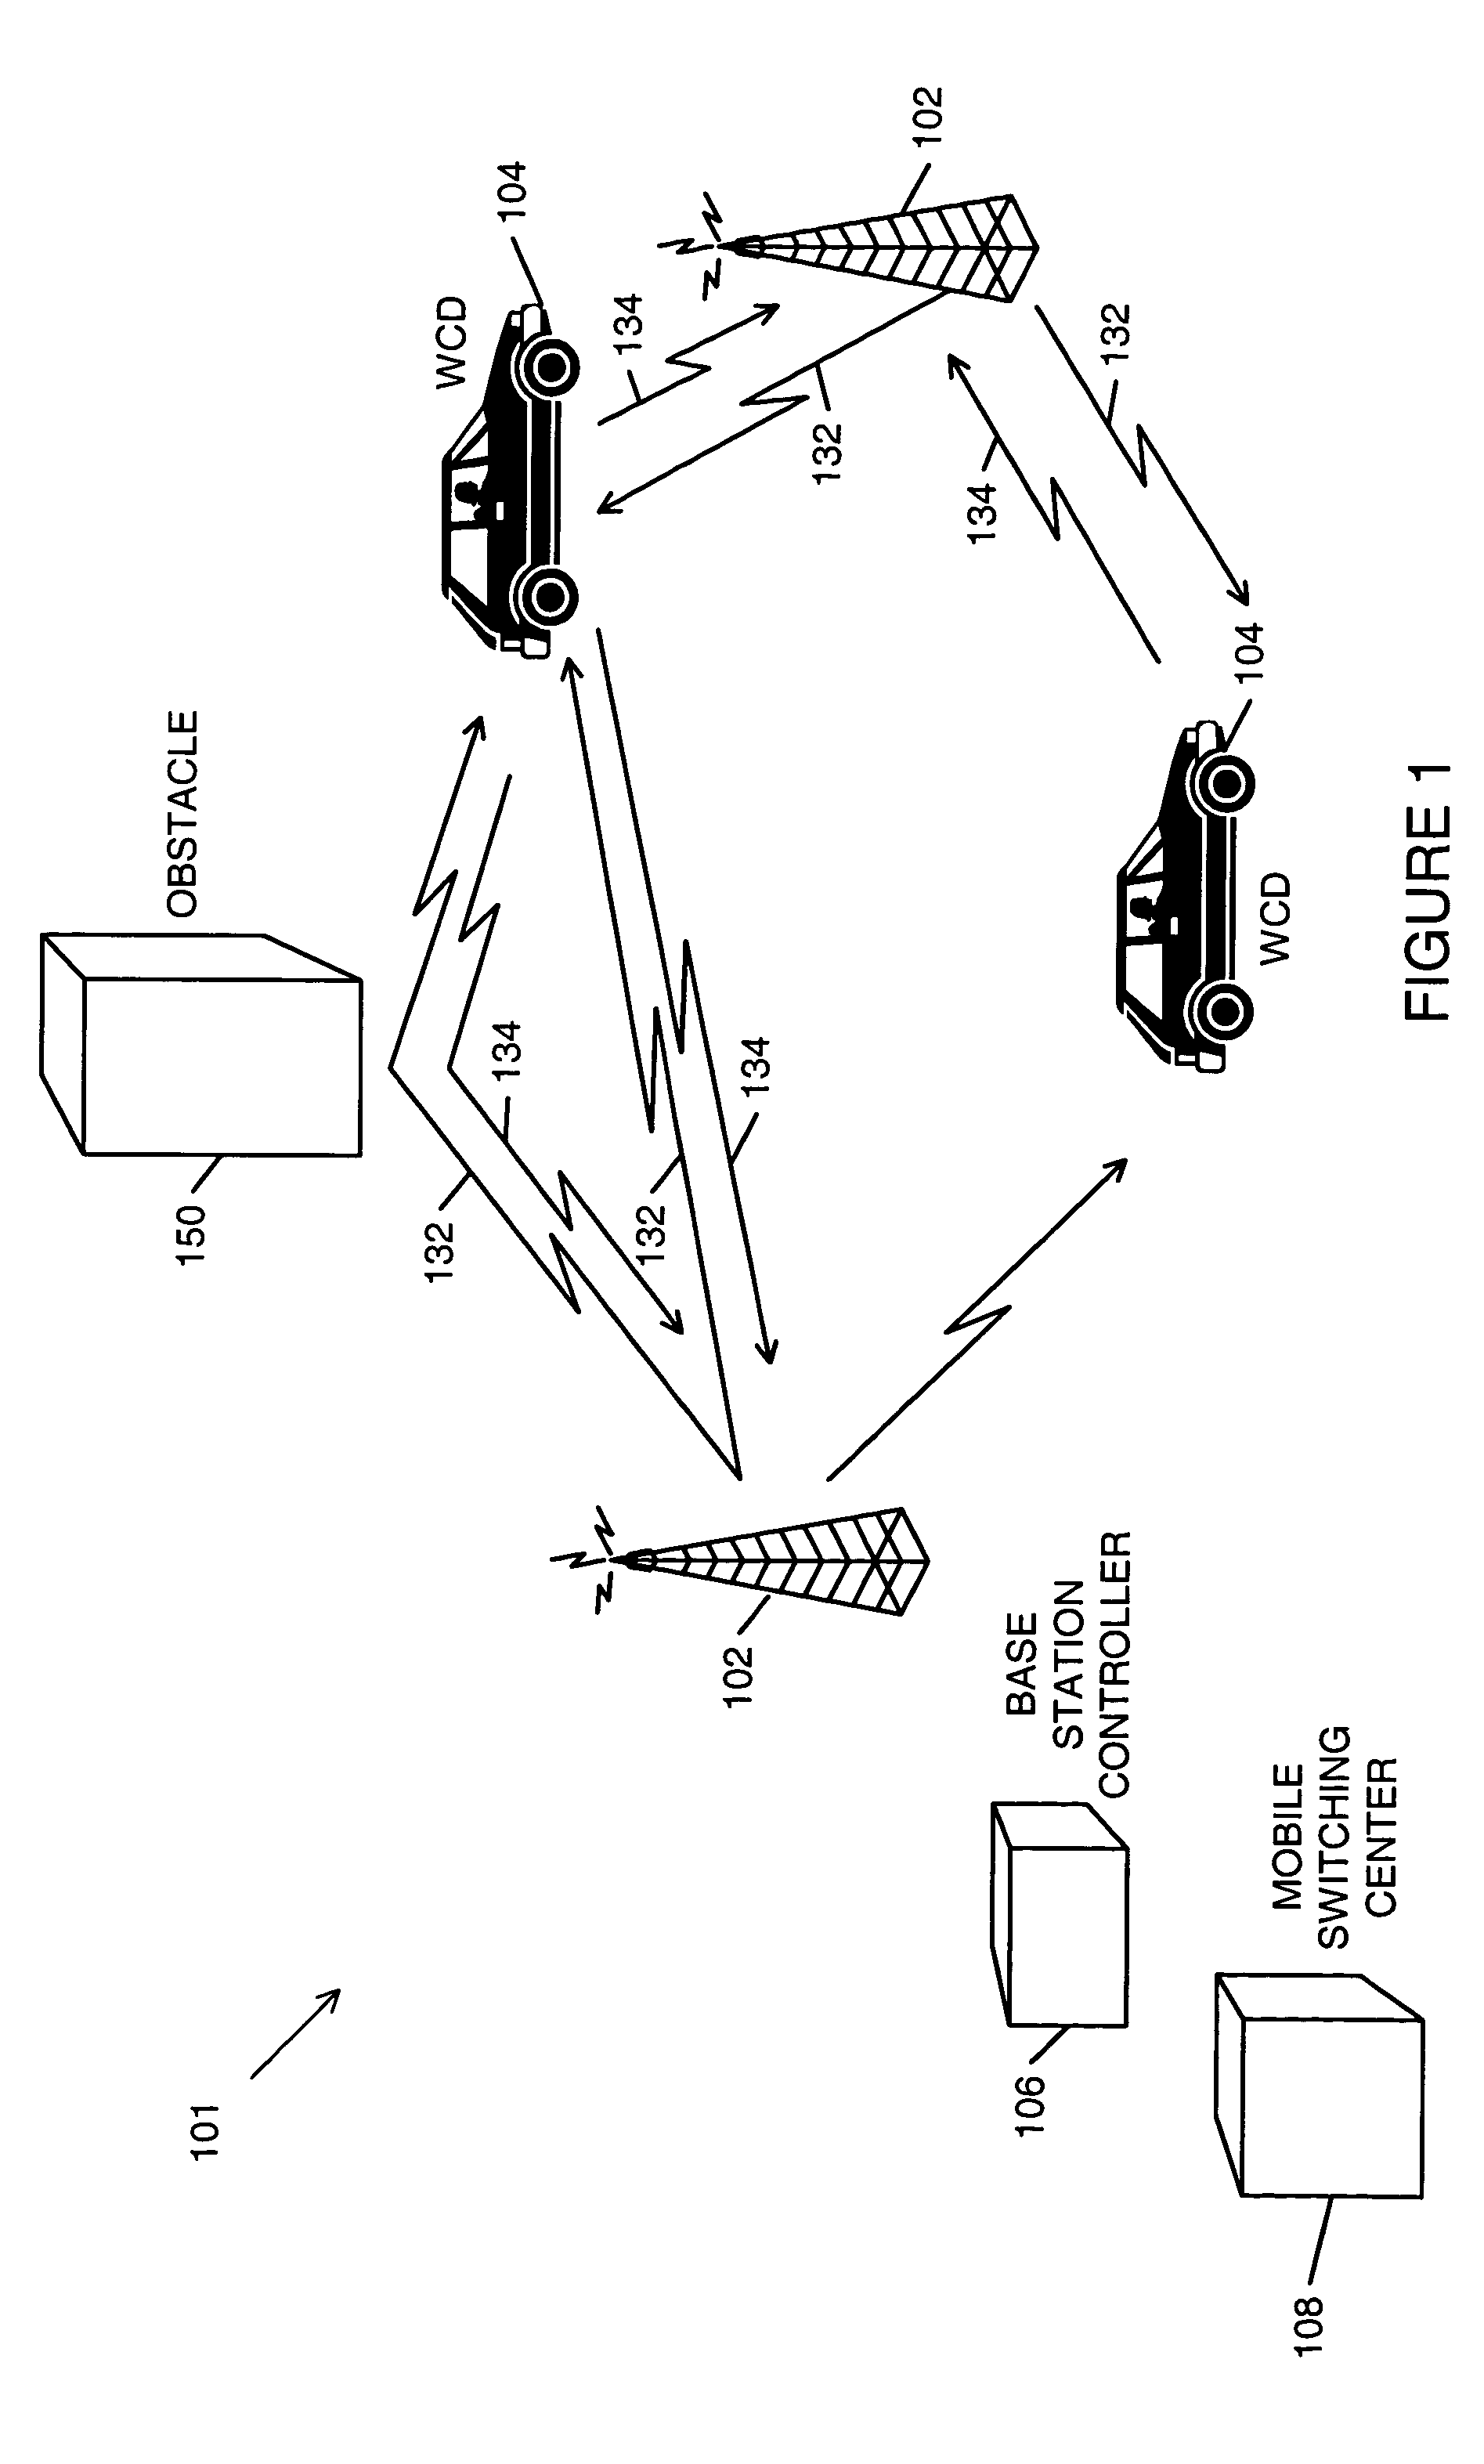 Adapting operation of a communication filter based on mobile unit velocity